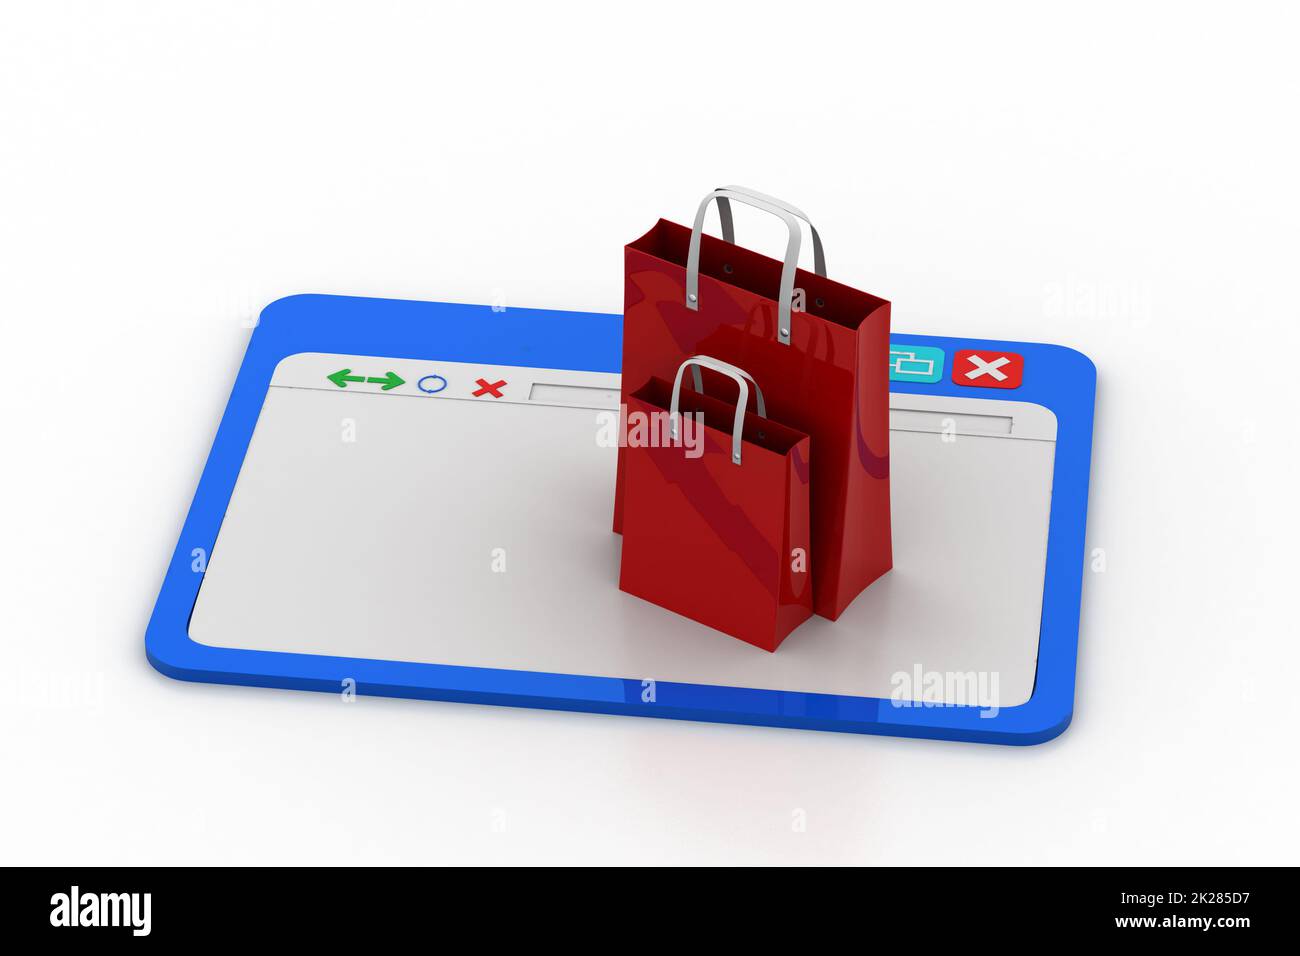 Web page showing shopping bag Stock Photo